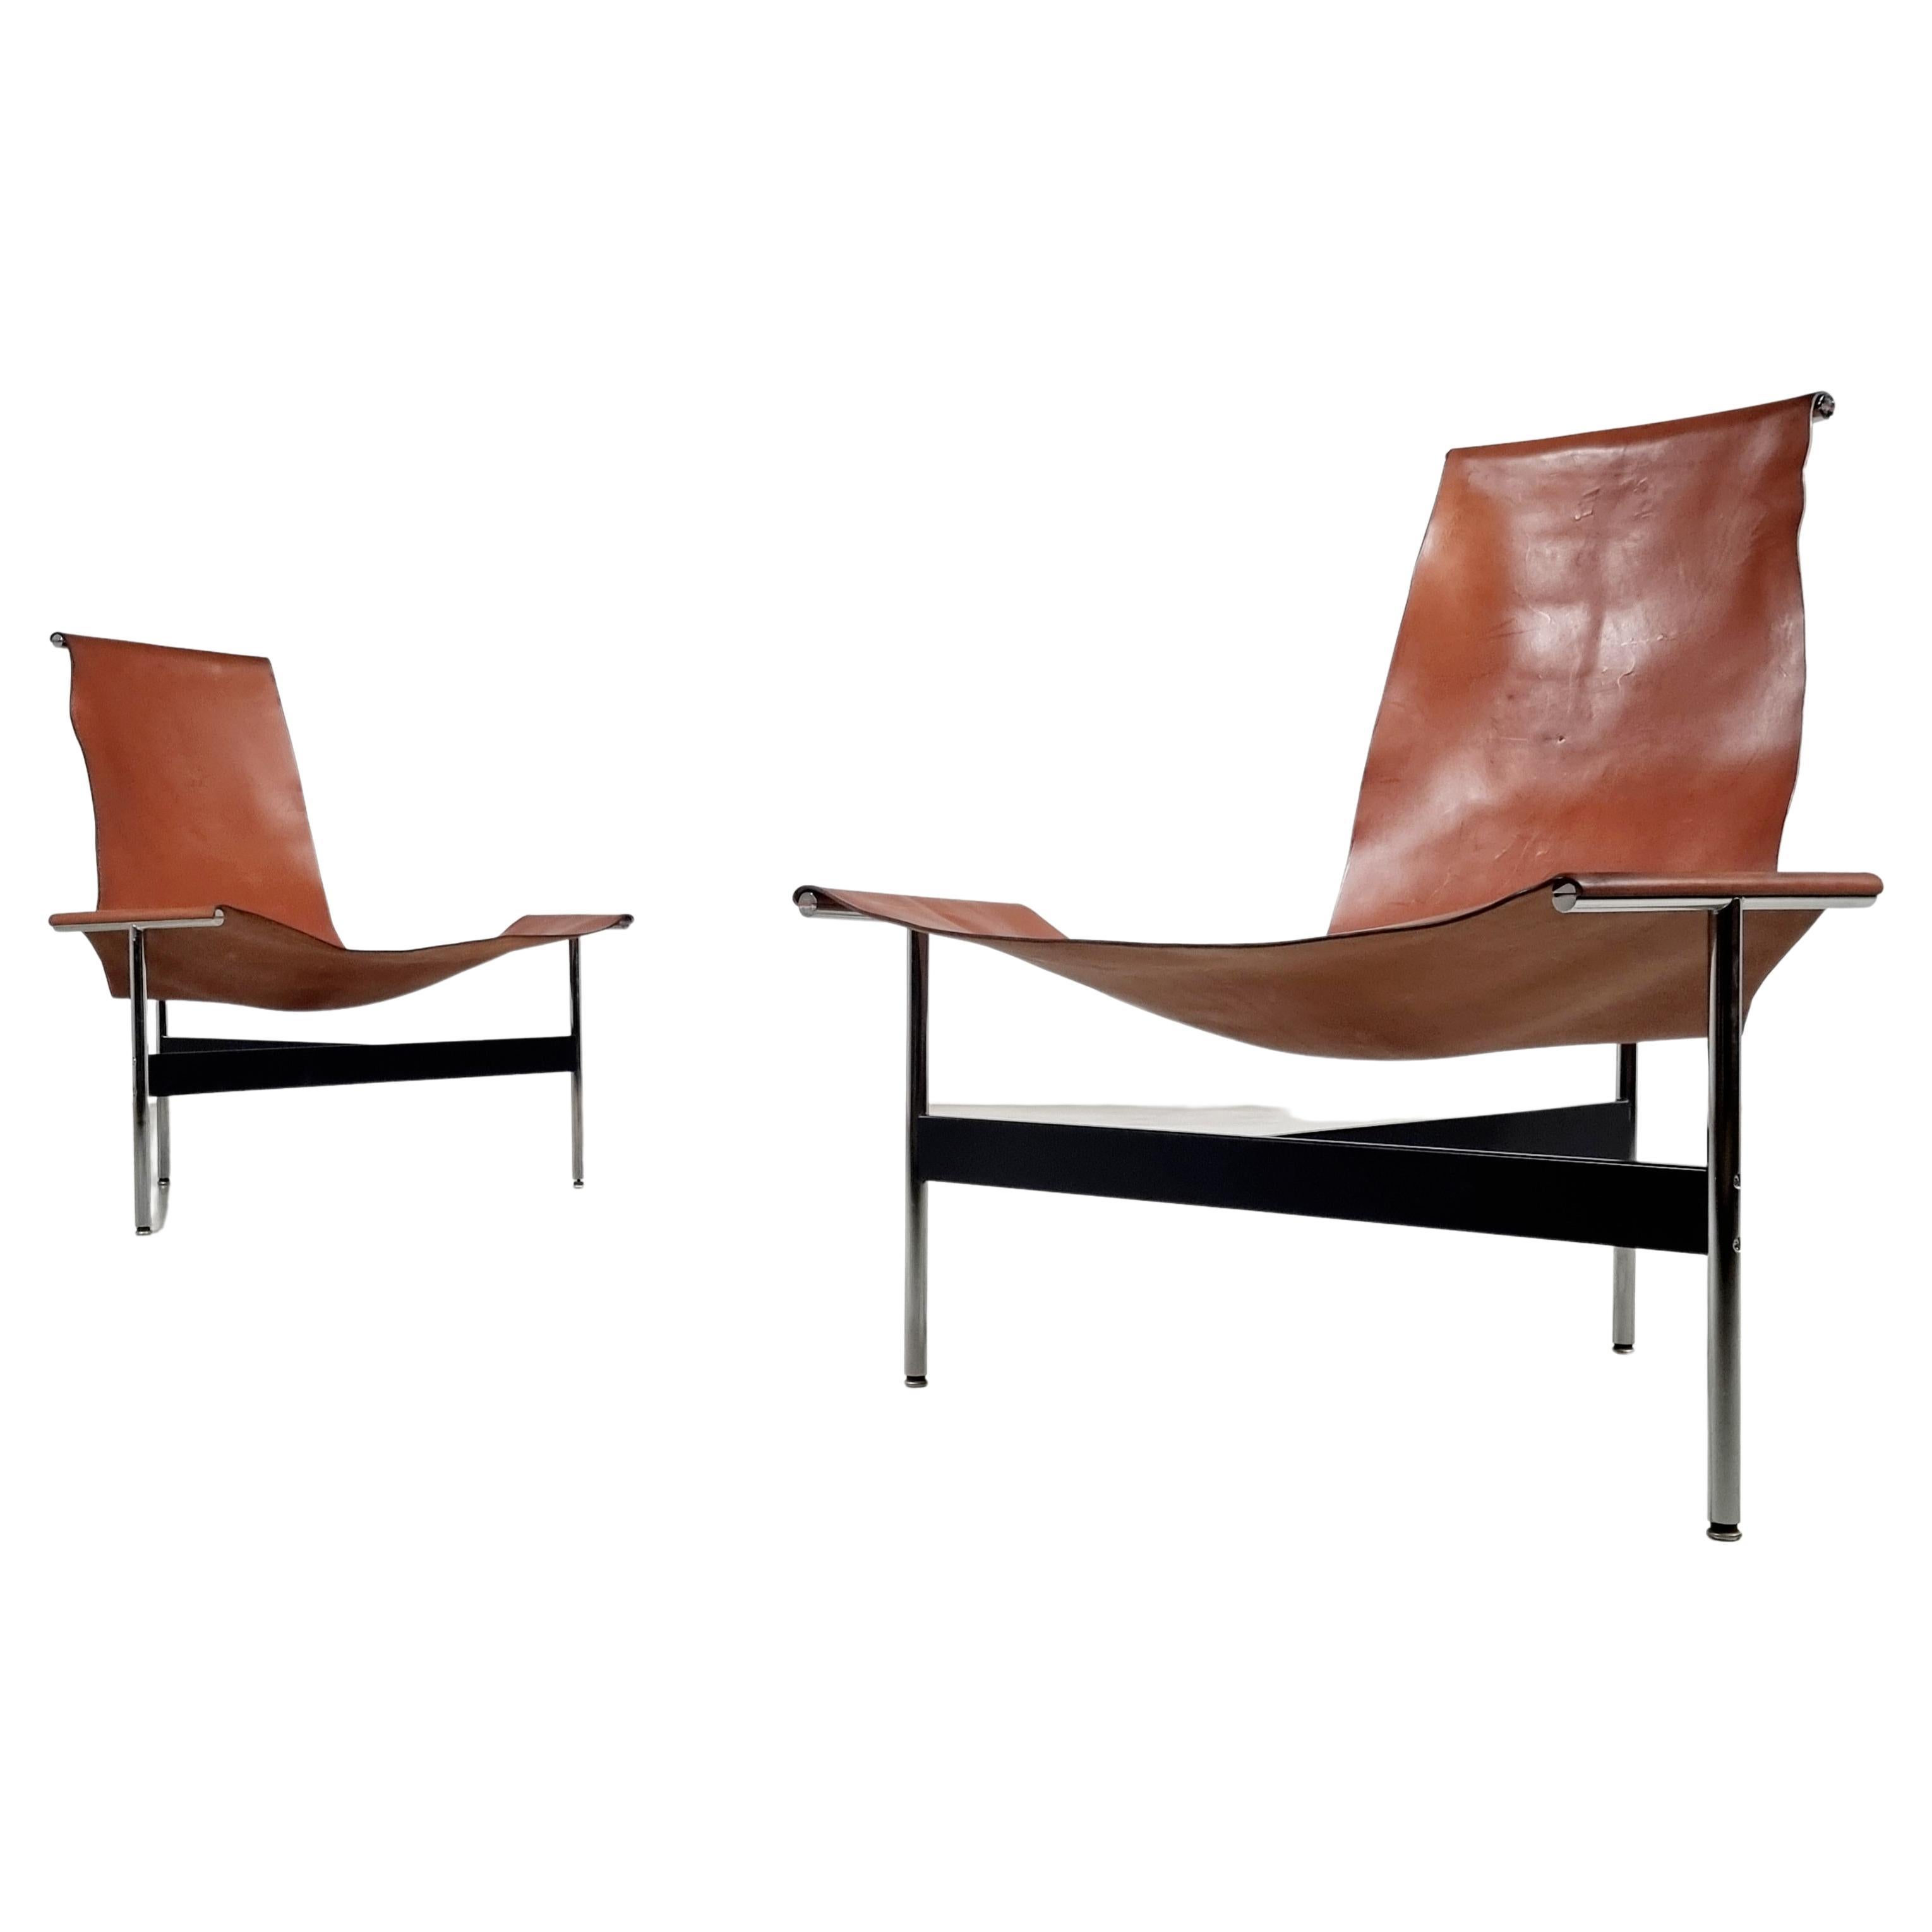 '3LC' T-Chairs by Katavolos, Littell and Kelley for Laverne International, 1950s